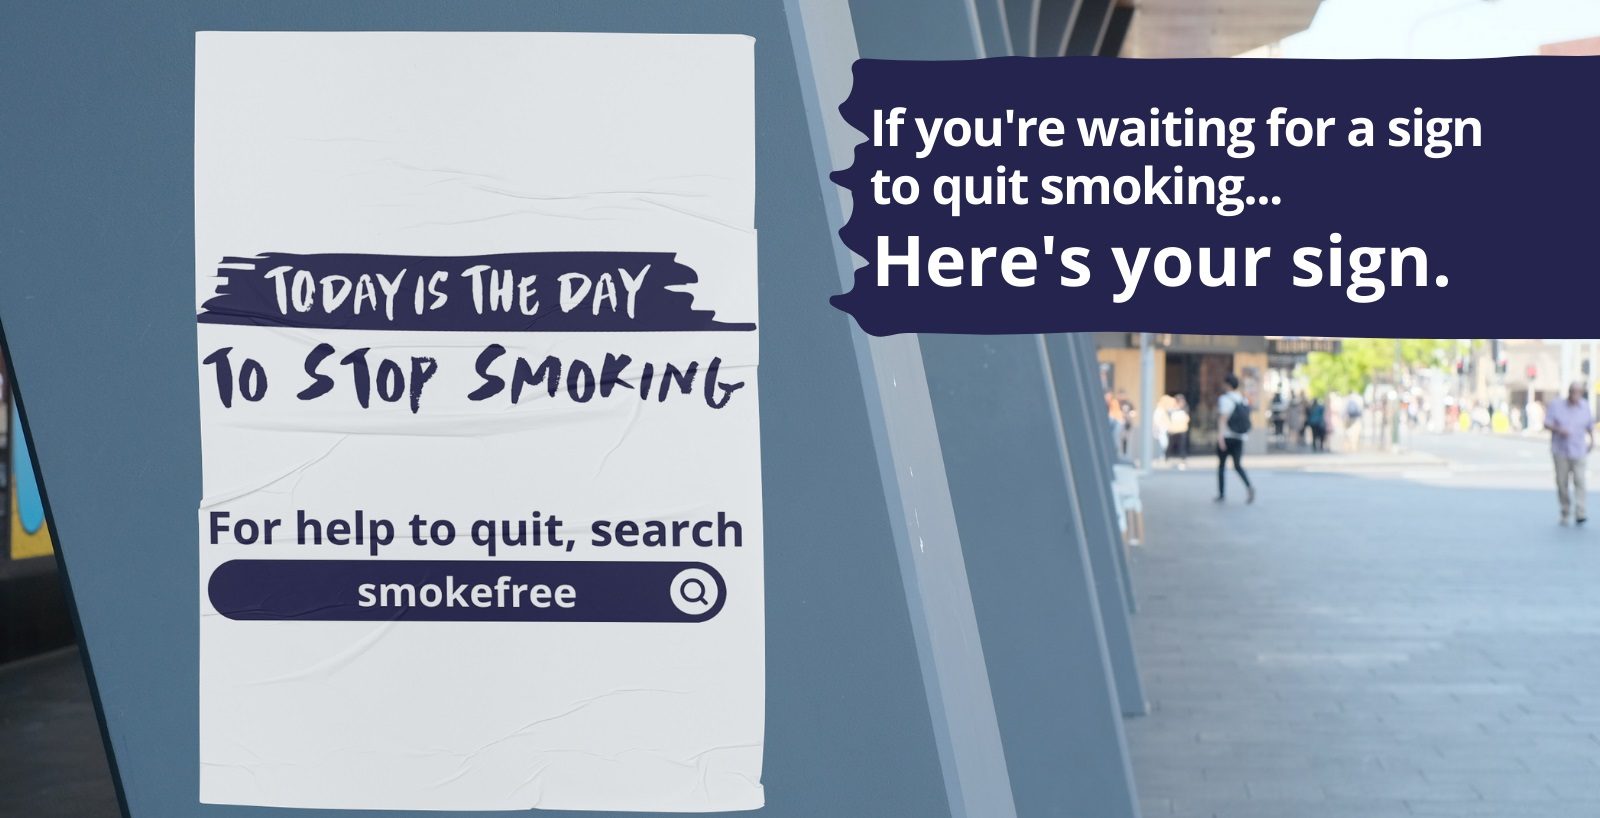 IF you're waiting for a sign to stop smoking, here's the sign